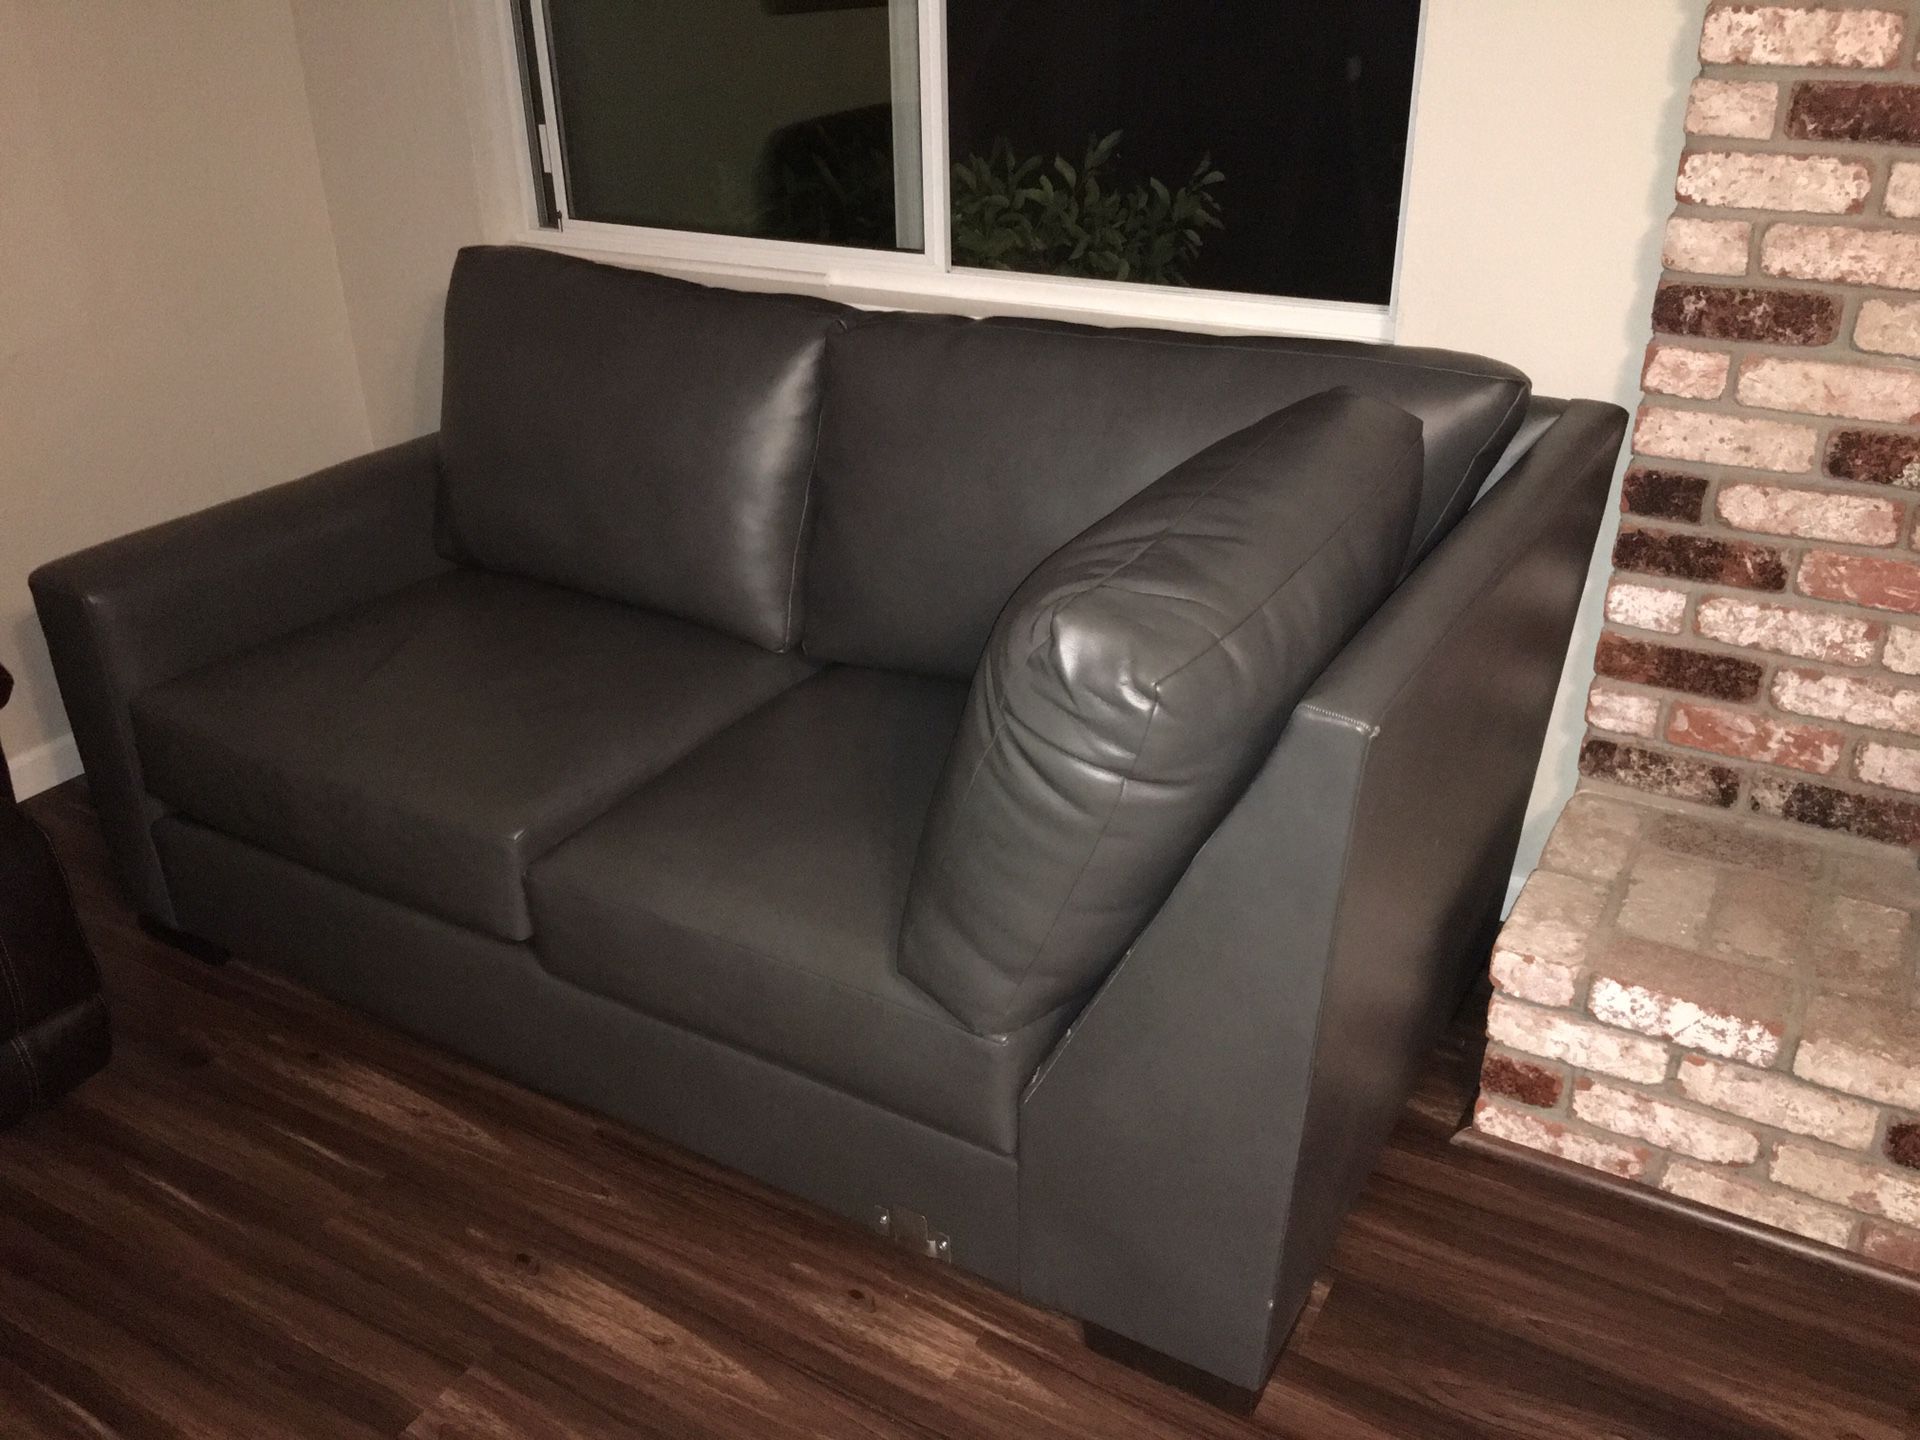 New grey faux leather couch